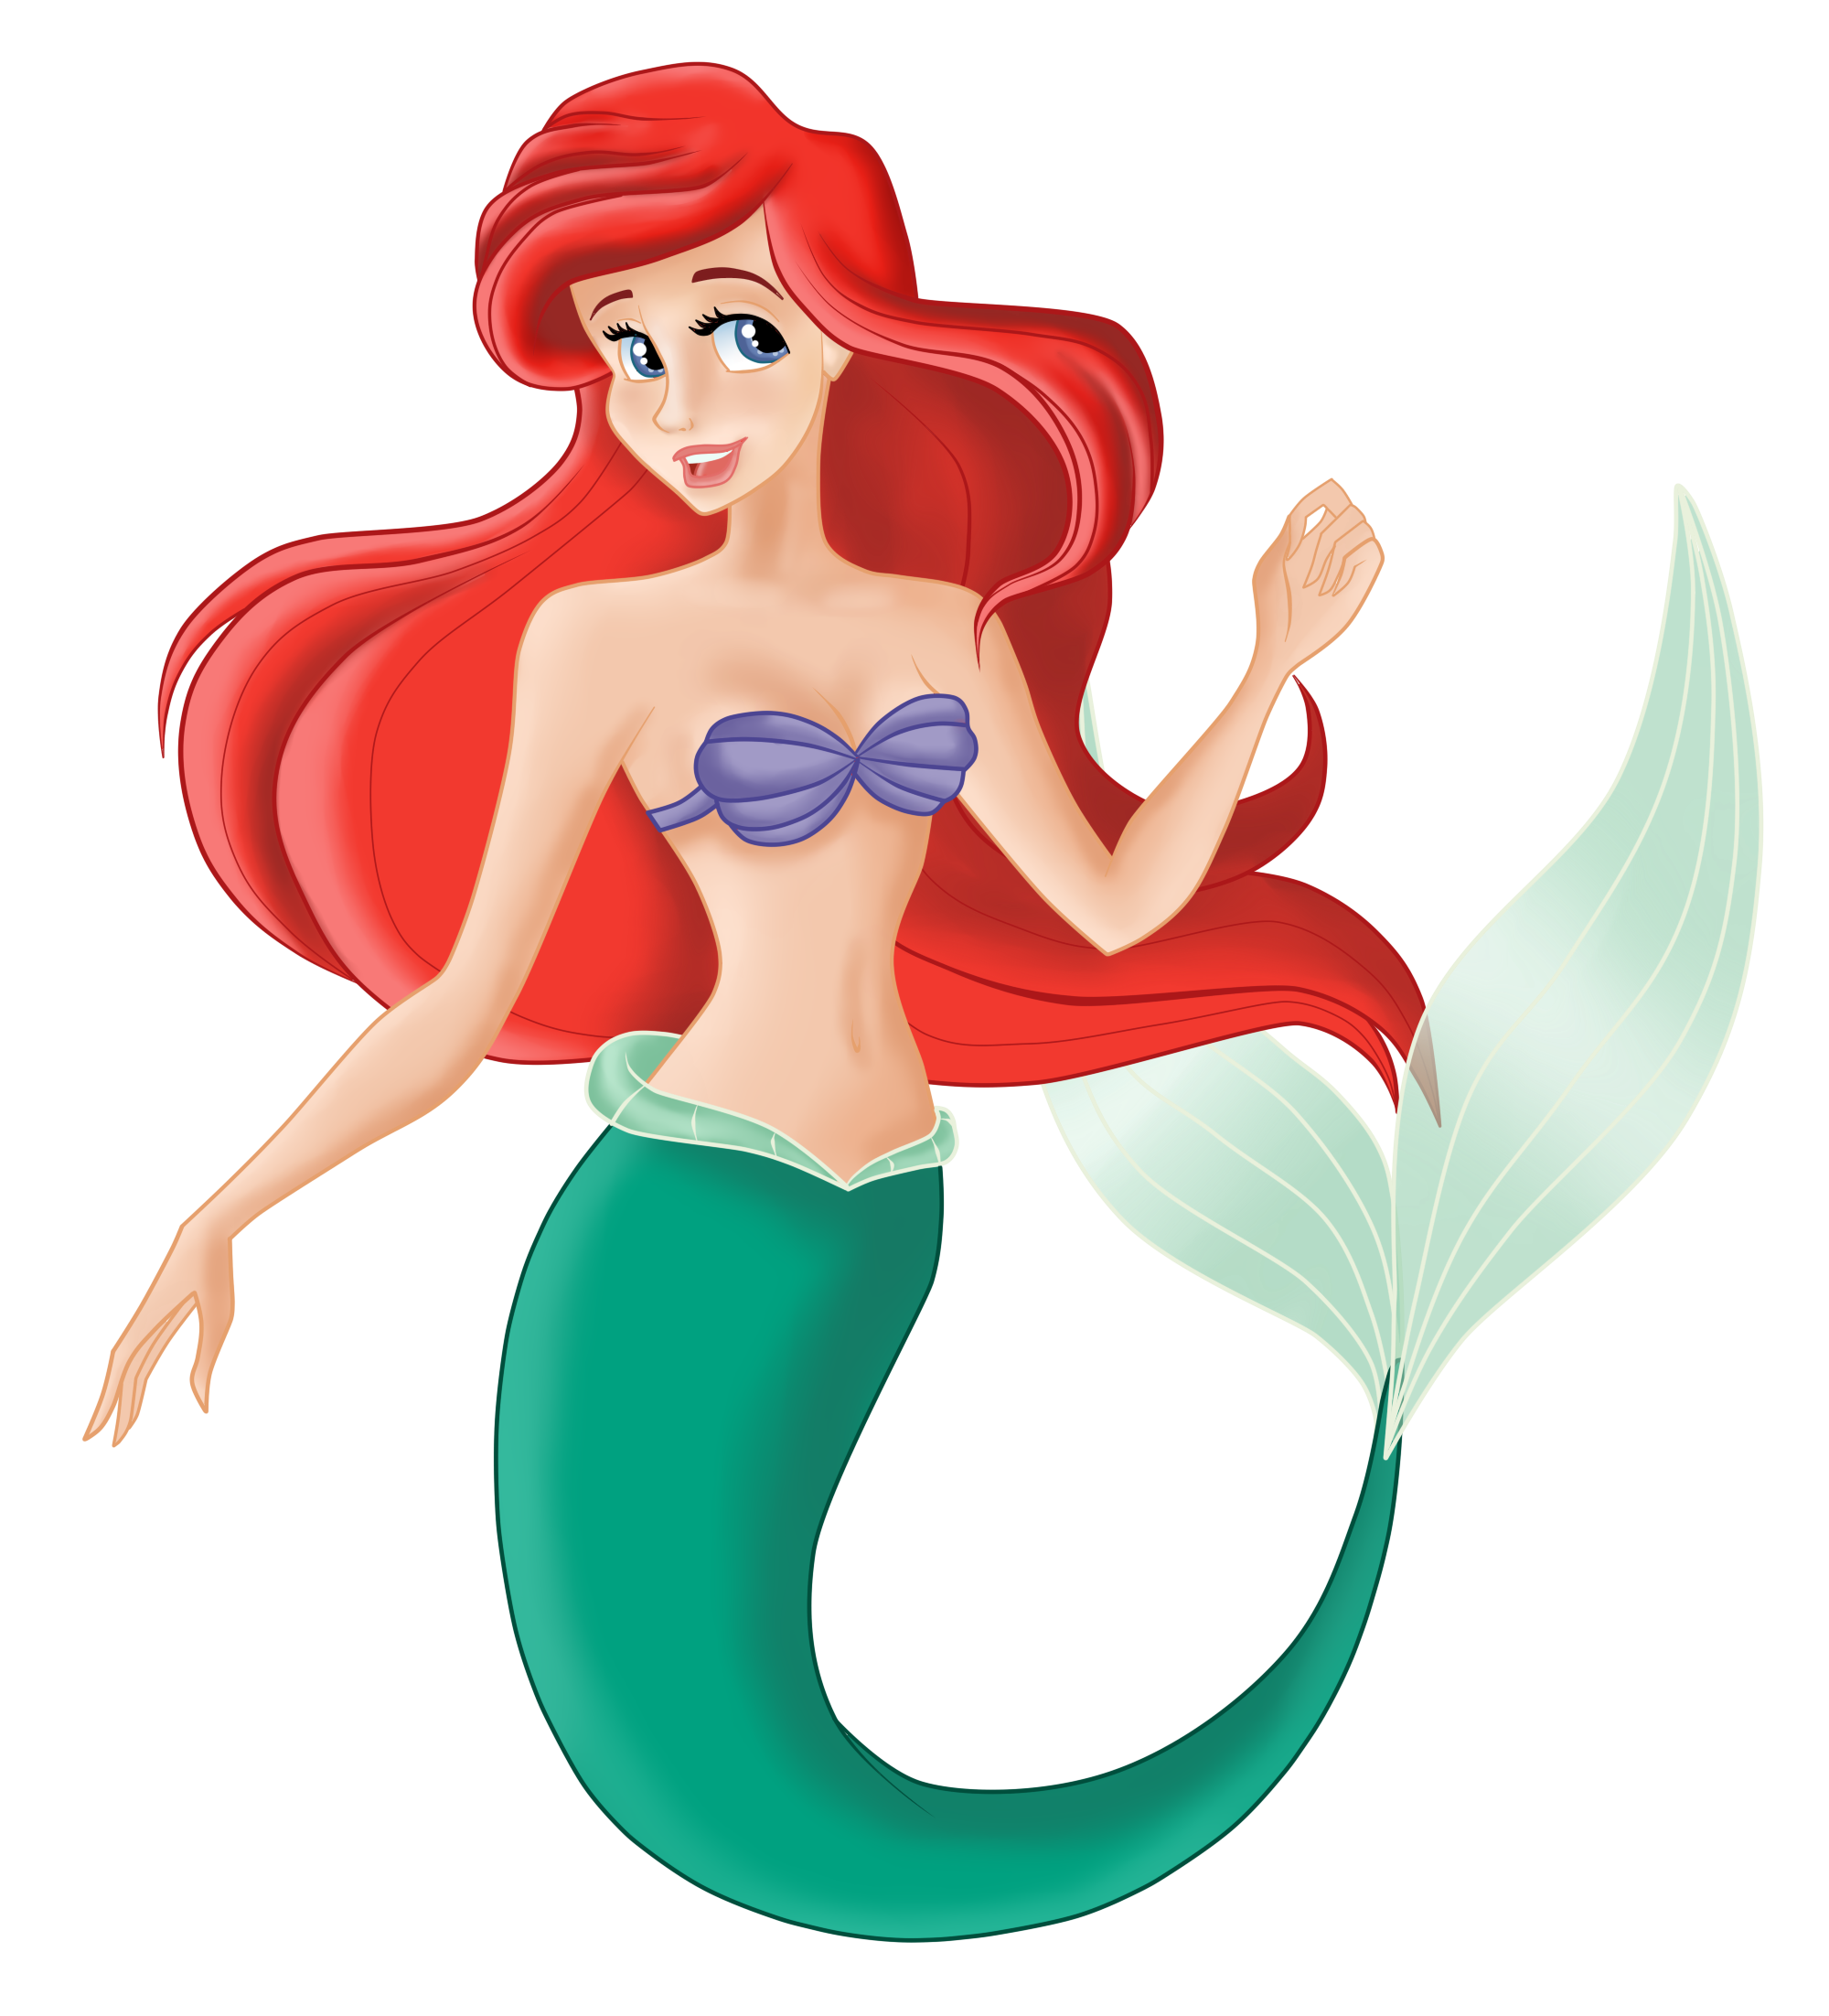 Body clipart mermaid. My ephemeral thoughts slice